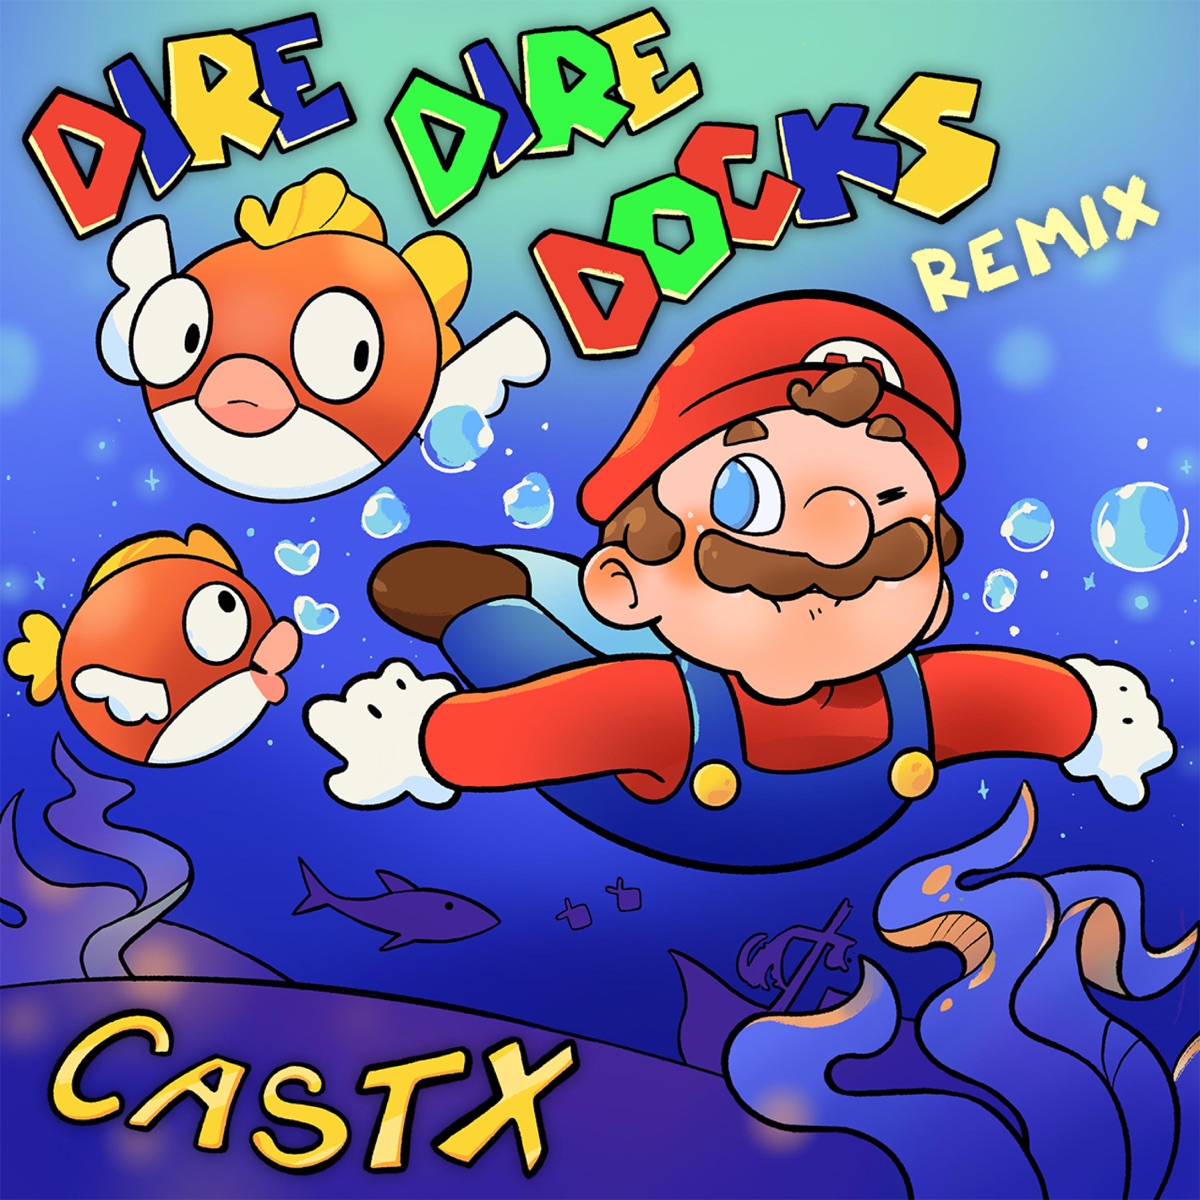 Castx - Peaches (Bowser's Song from The Super Mario Bros. Movie